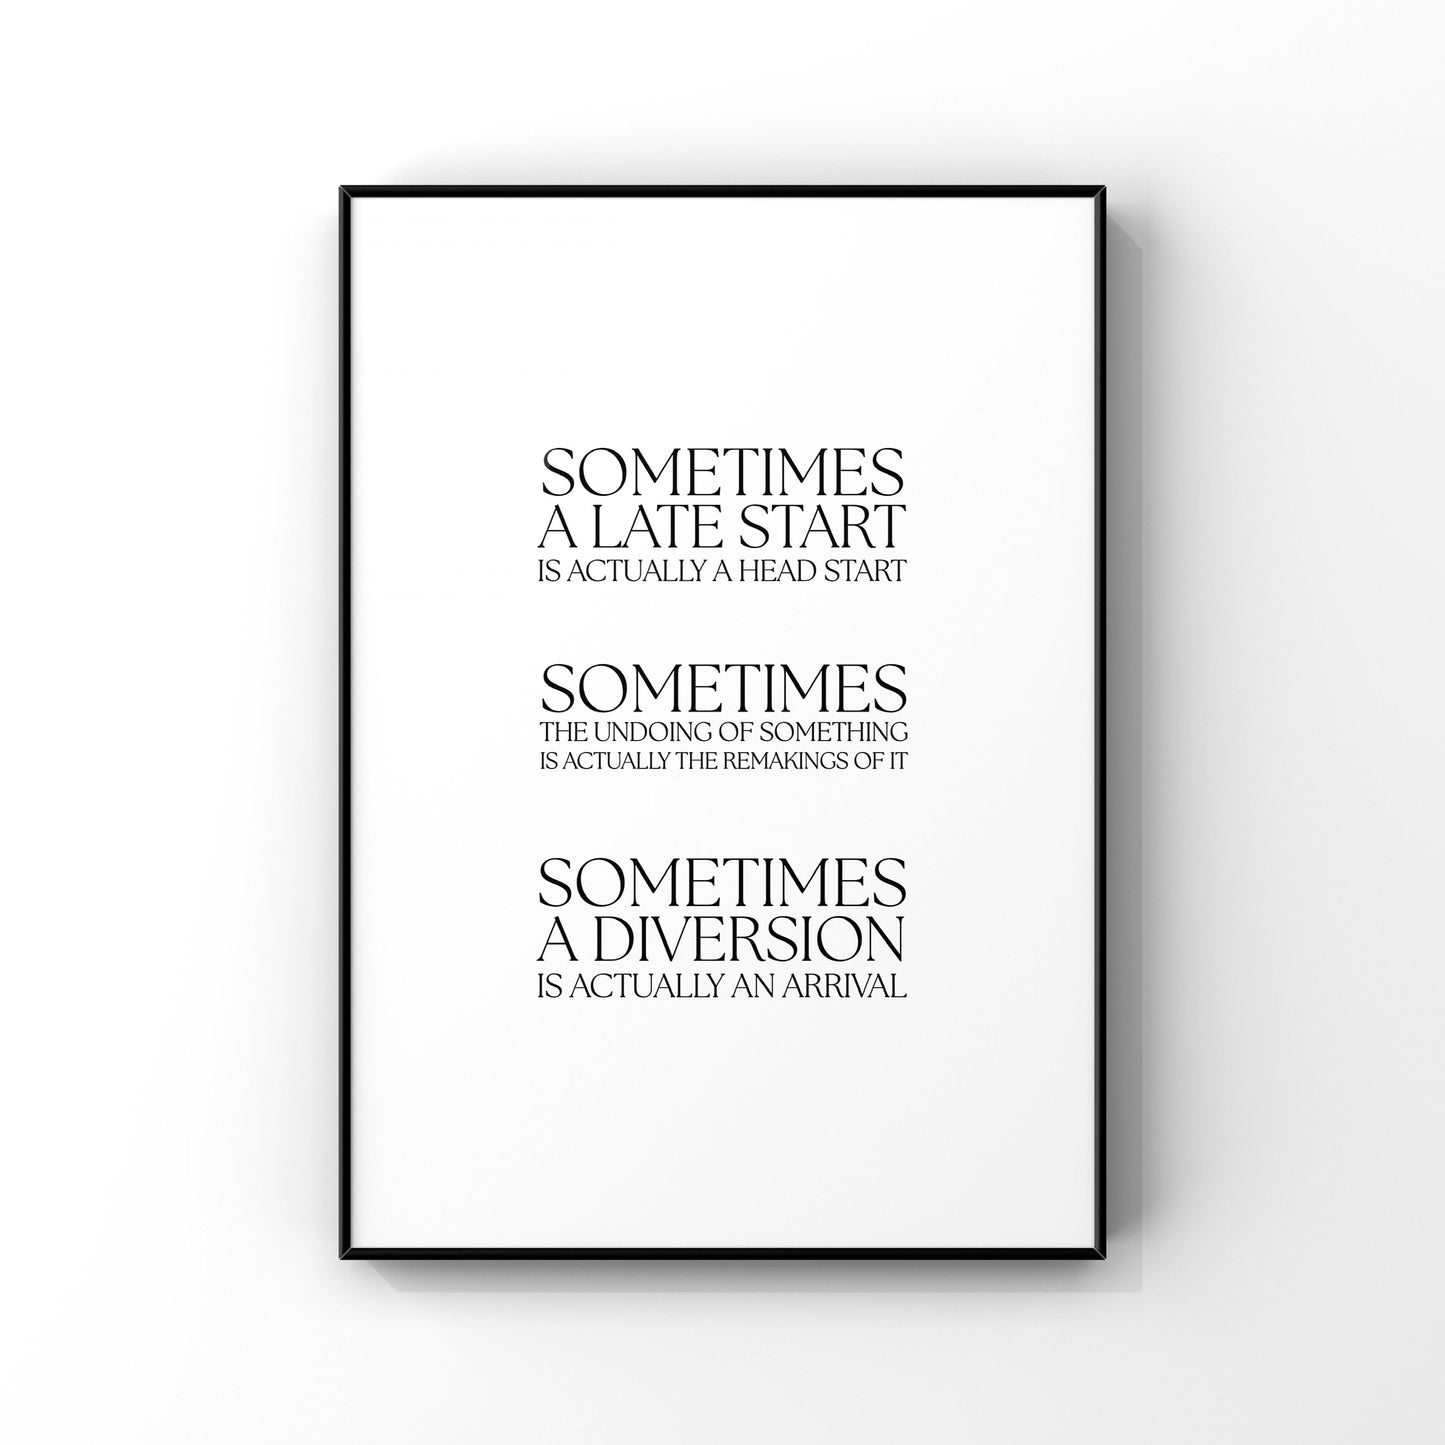 Sometimes a late start,Inspirational wall art,Motivational quote print,Positive quote,Wall art,Encouragement gift,Hang in there,You got this